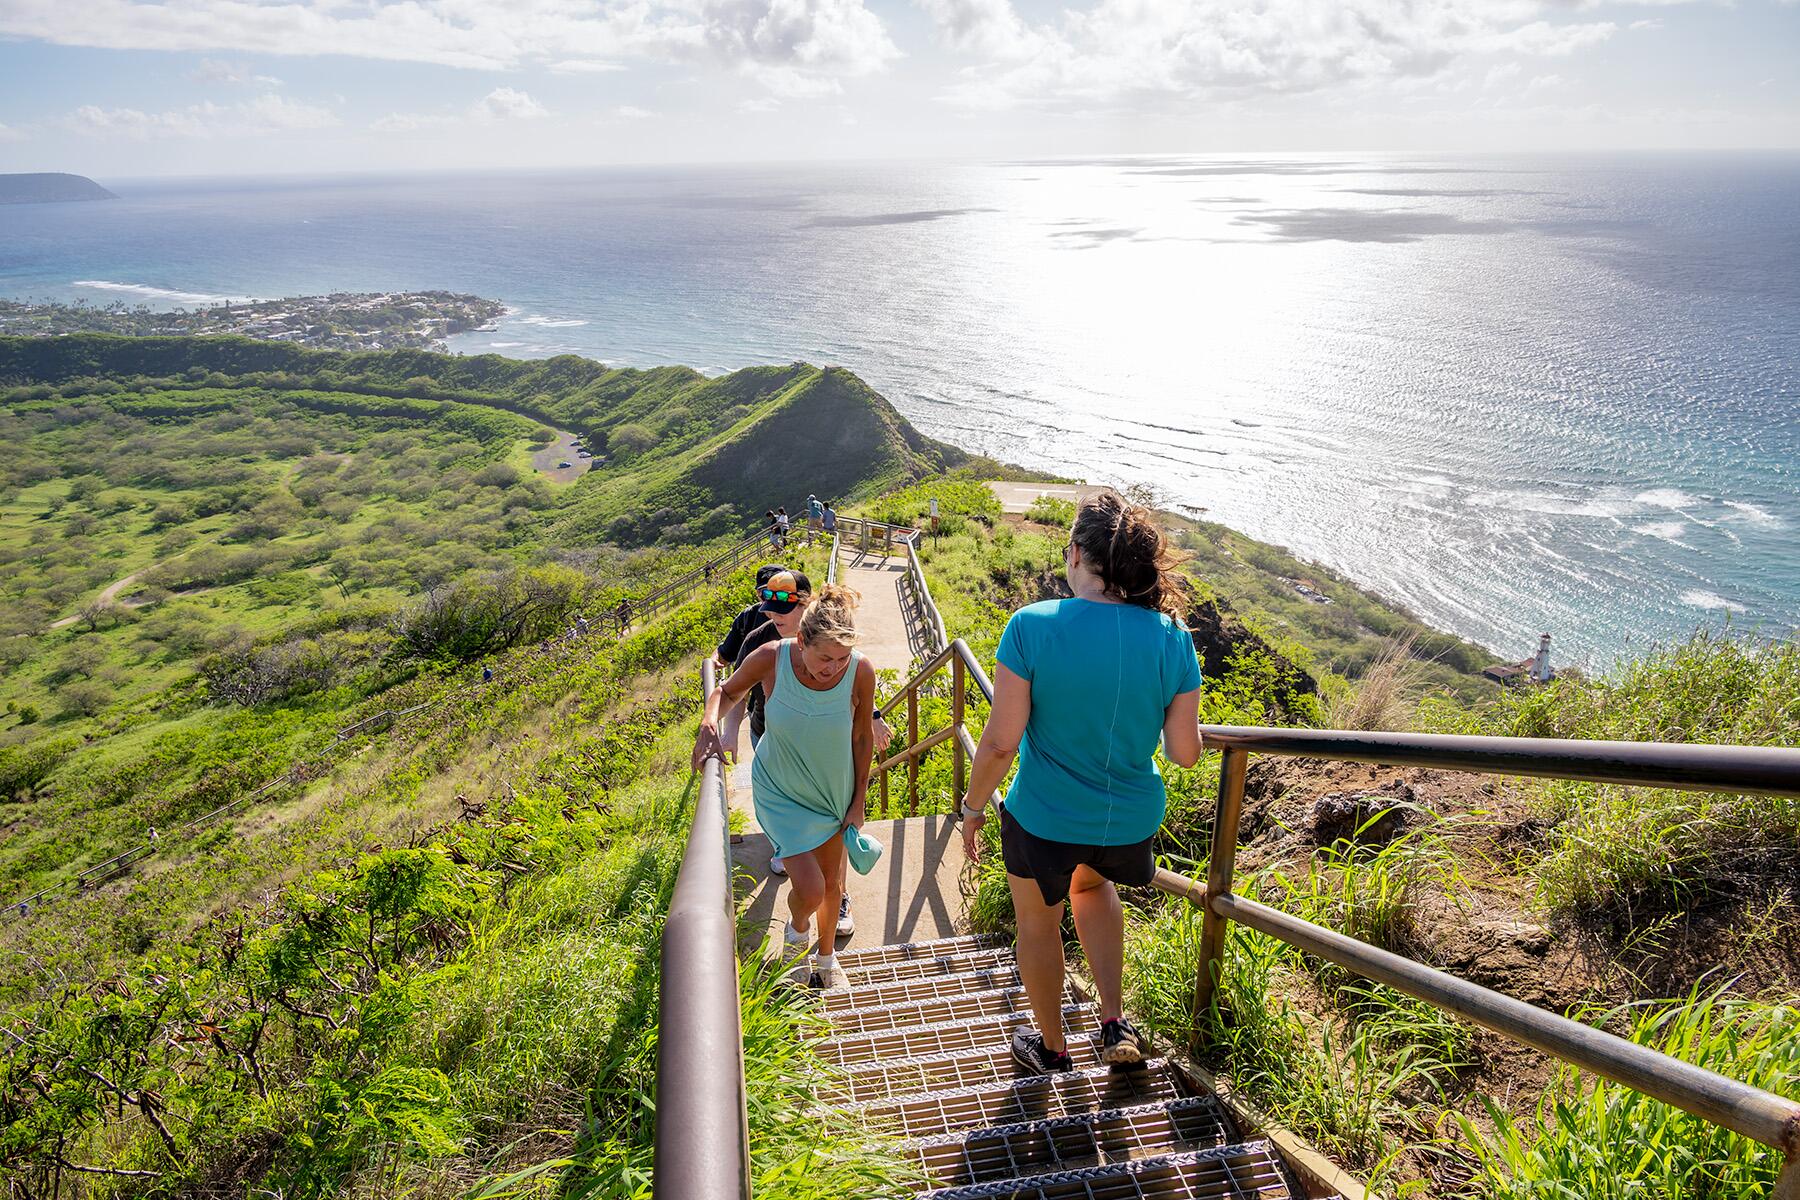 <a href='https://www.fodors.com/world/north-america/usa/hawaii/experiences/news/photos/dont-do-these-things-in-hawaii#'>From &quot;The Absolute Dumbest Things Tourists Have Done in Hawaii: Climbing the Stairway to Heaven&quot;</a>